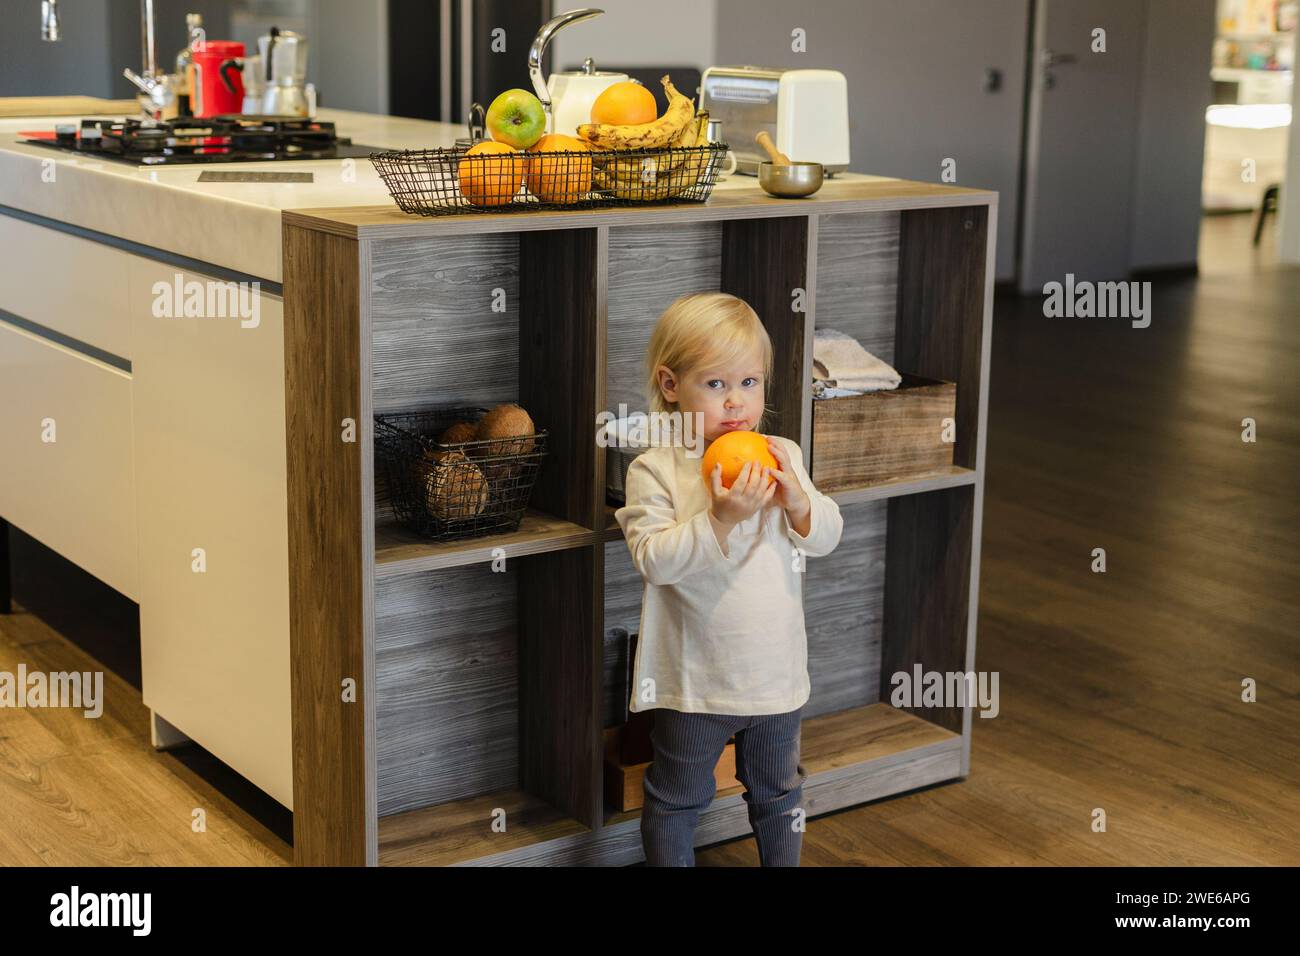 Girl holding orange fruit and standing near kitchen island at home Stock Photo